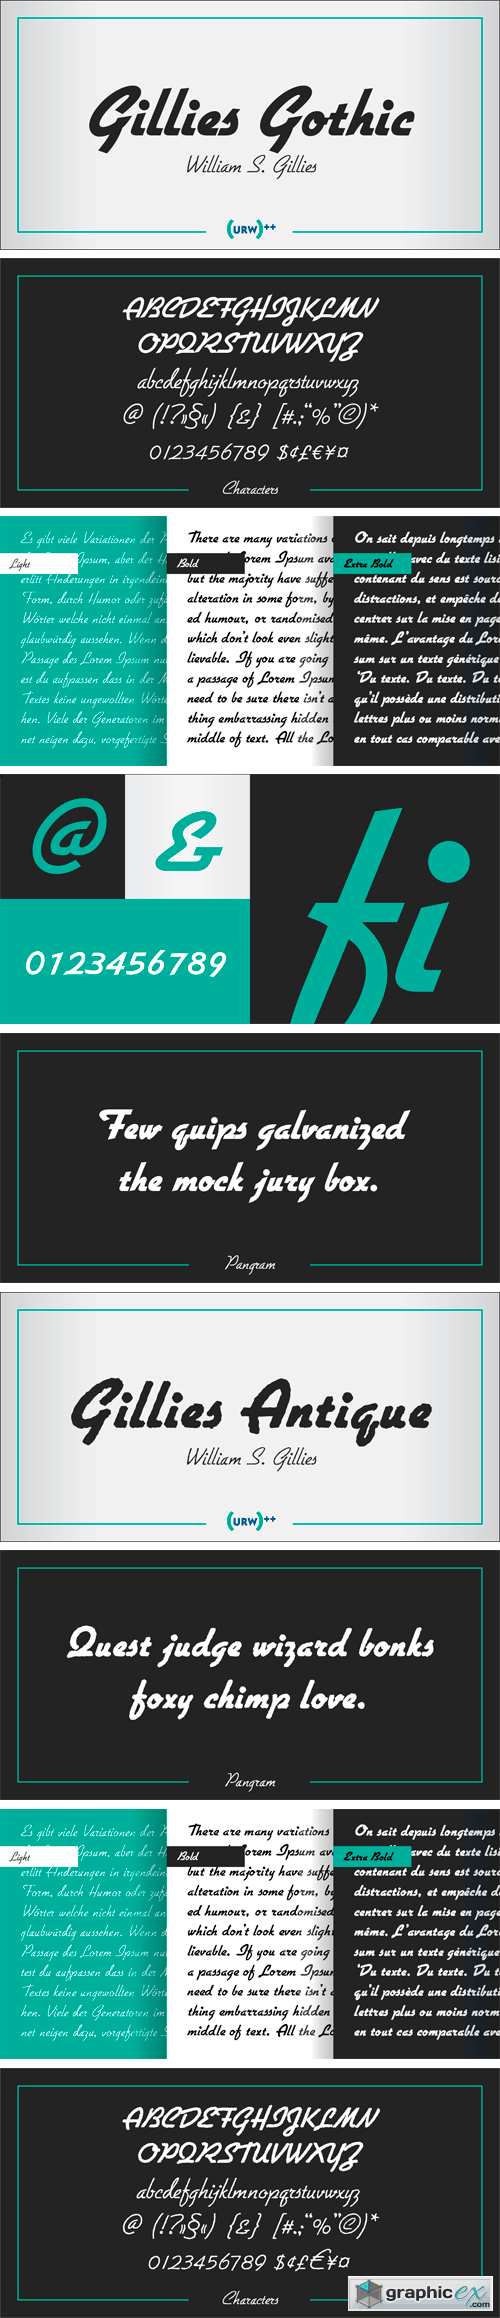 Gillies Gothic Font Family